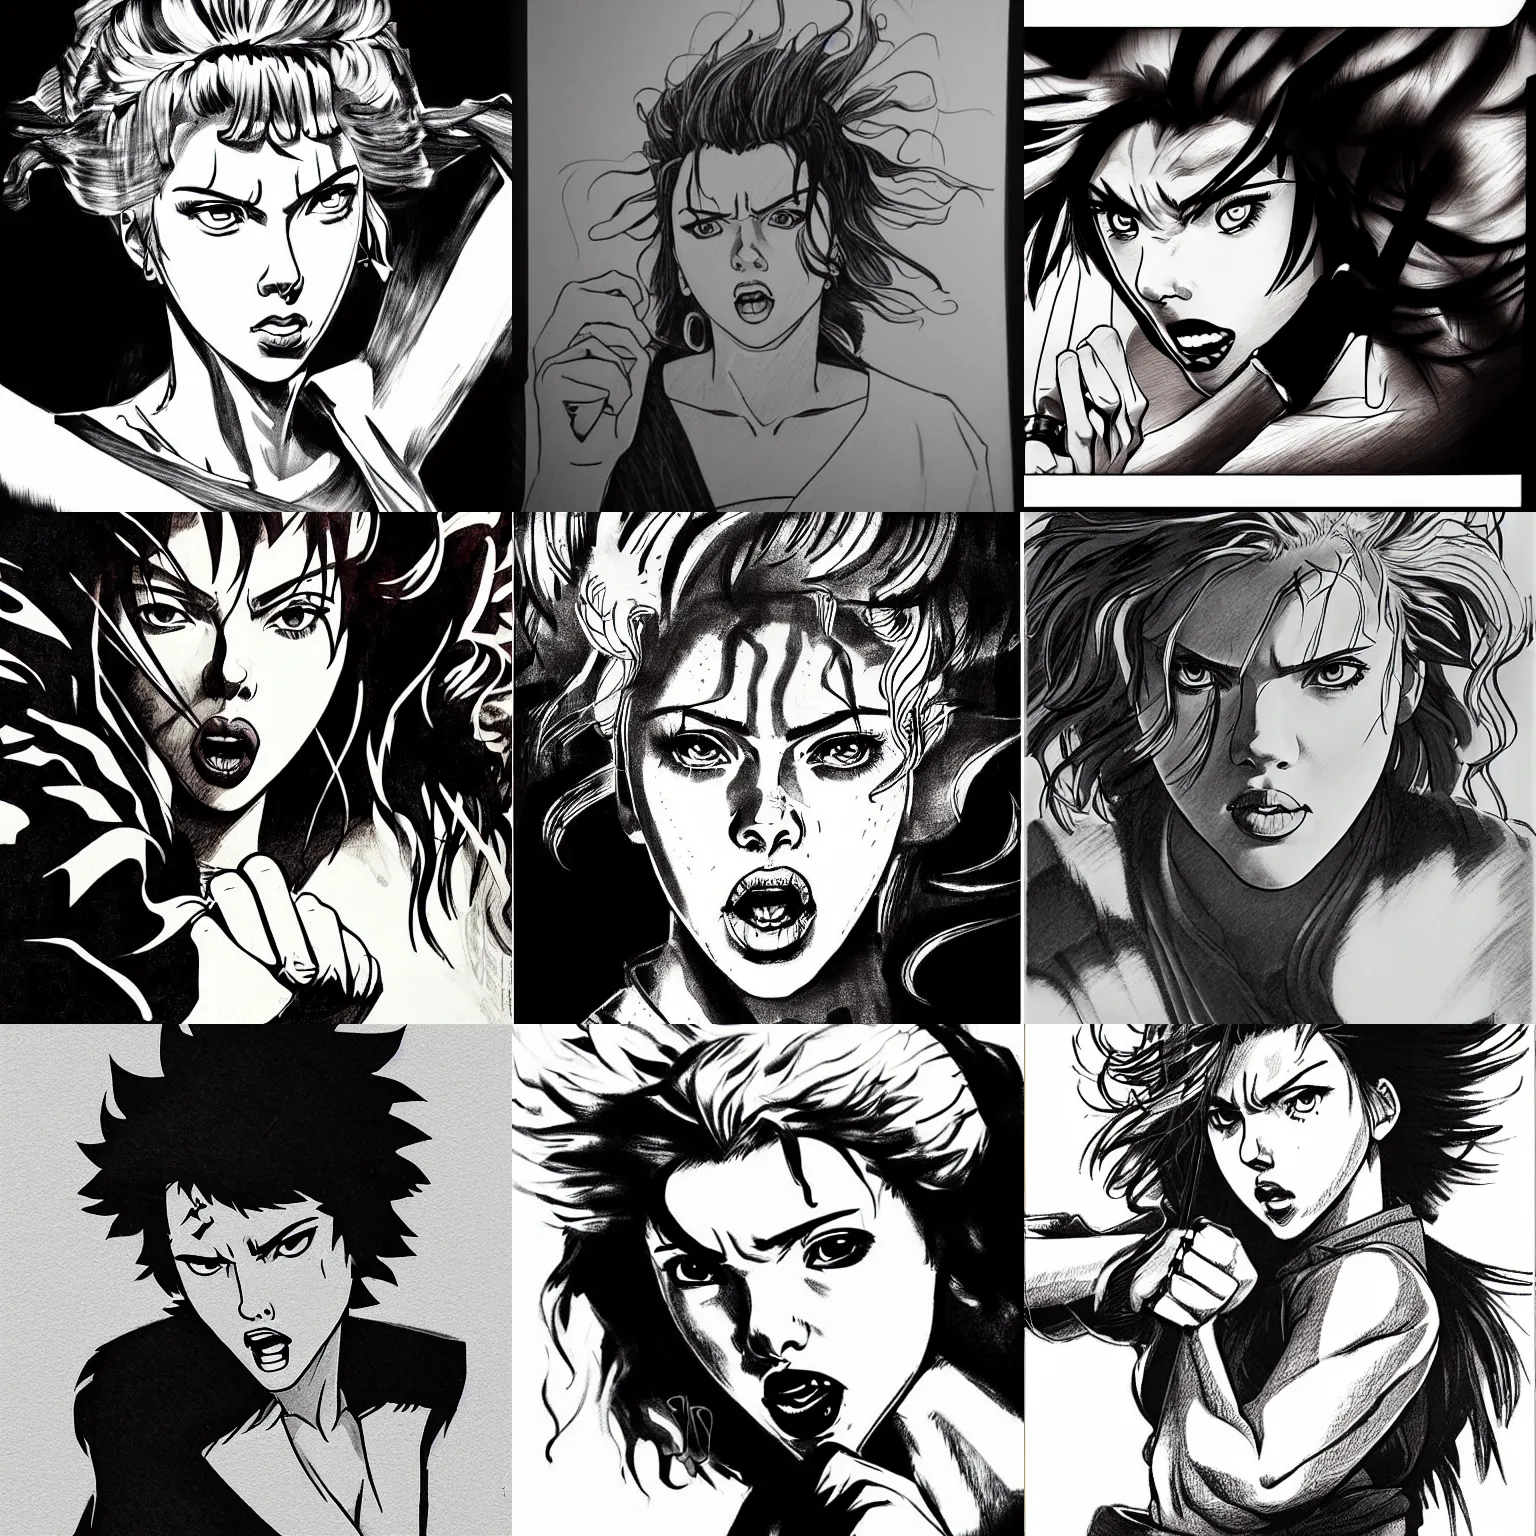 Prompt: 1 0 key frames, high description fidelity, high description consistency, scarlett johansson with angry expression, swinging fist, afro samurai anime. dramatic lighting, anime style, pencil and ink manga drawing,